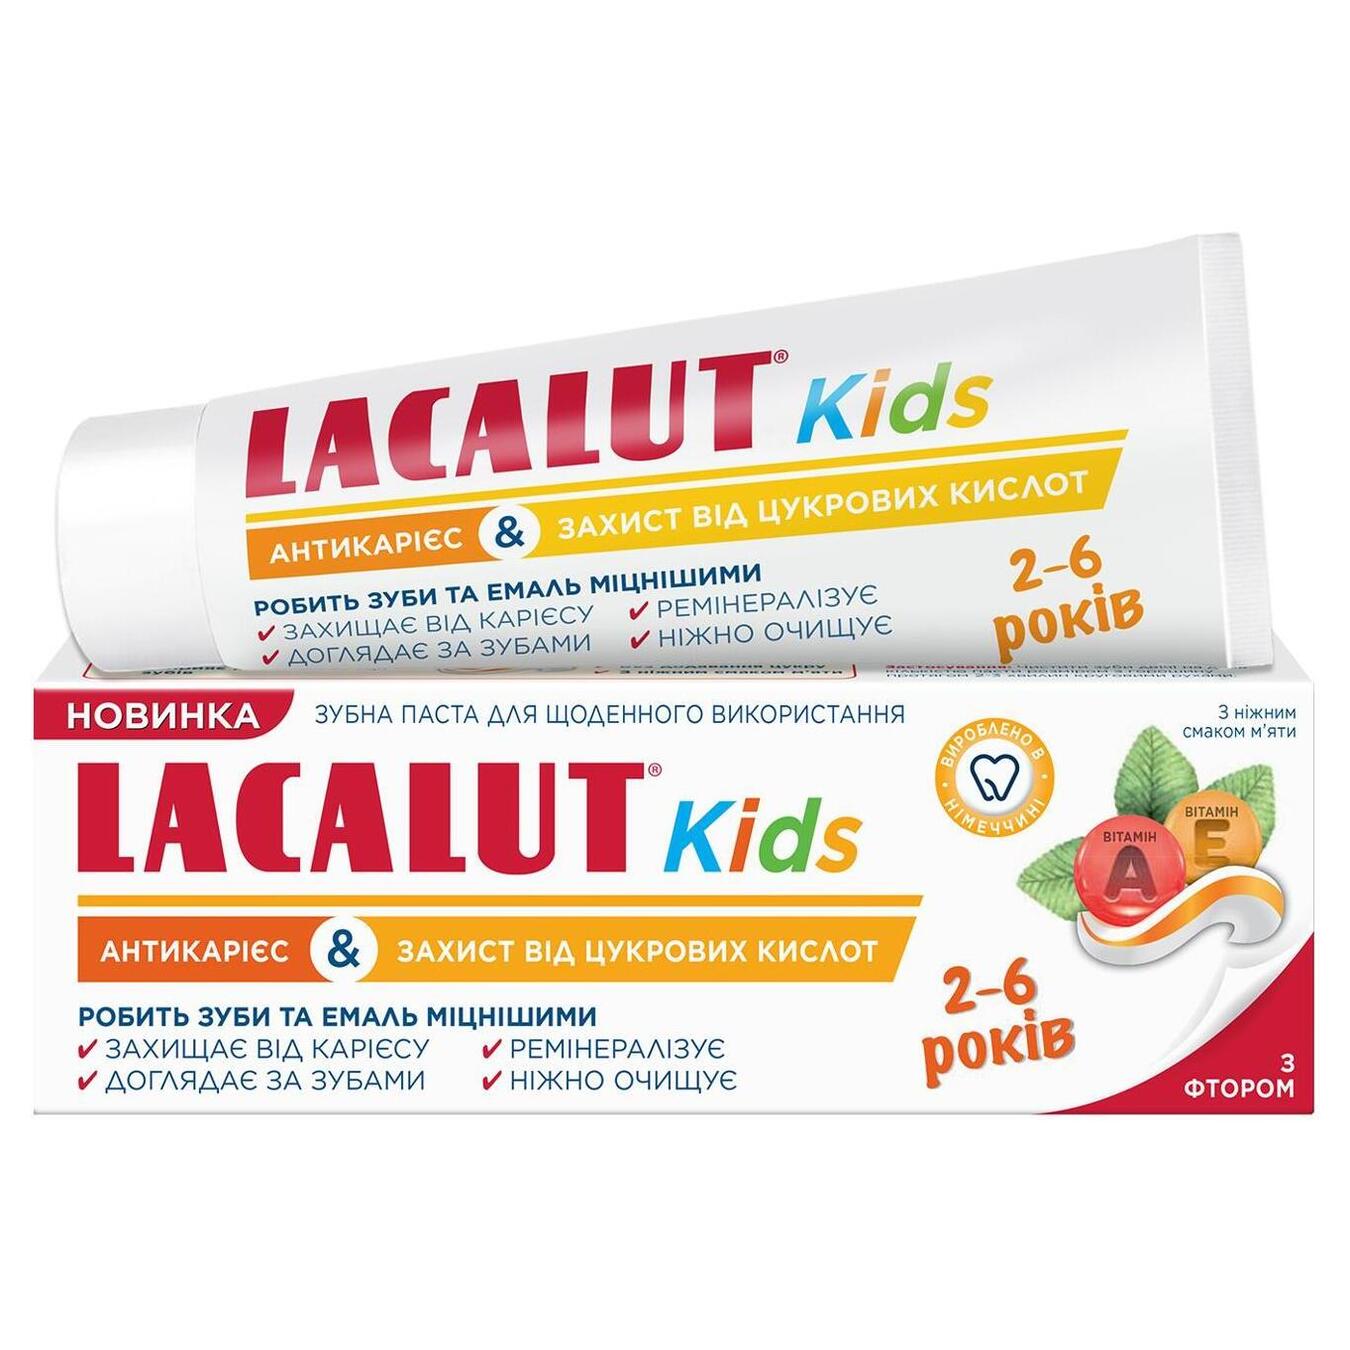 Toothpaste Lacalut Kids anti-caries and protection against sugar acids 55 ml